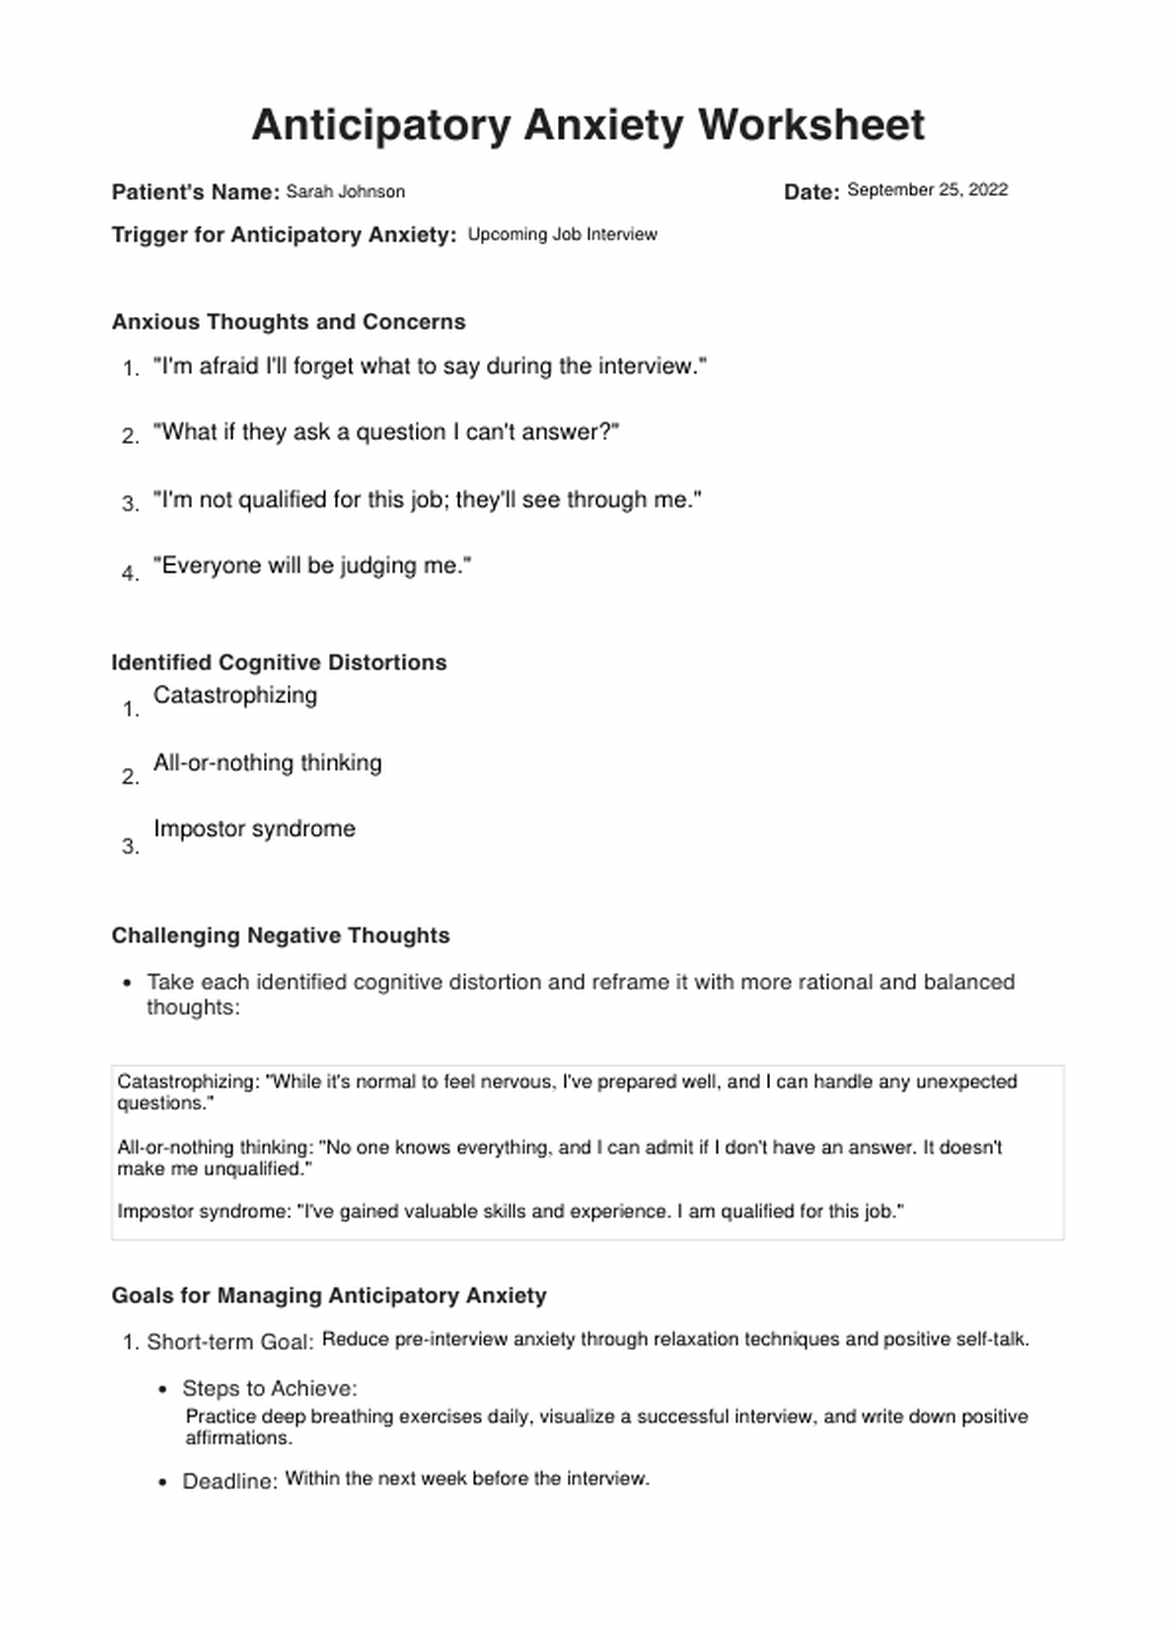 Anticipatory Anxiety Worksheets PDF Example